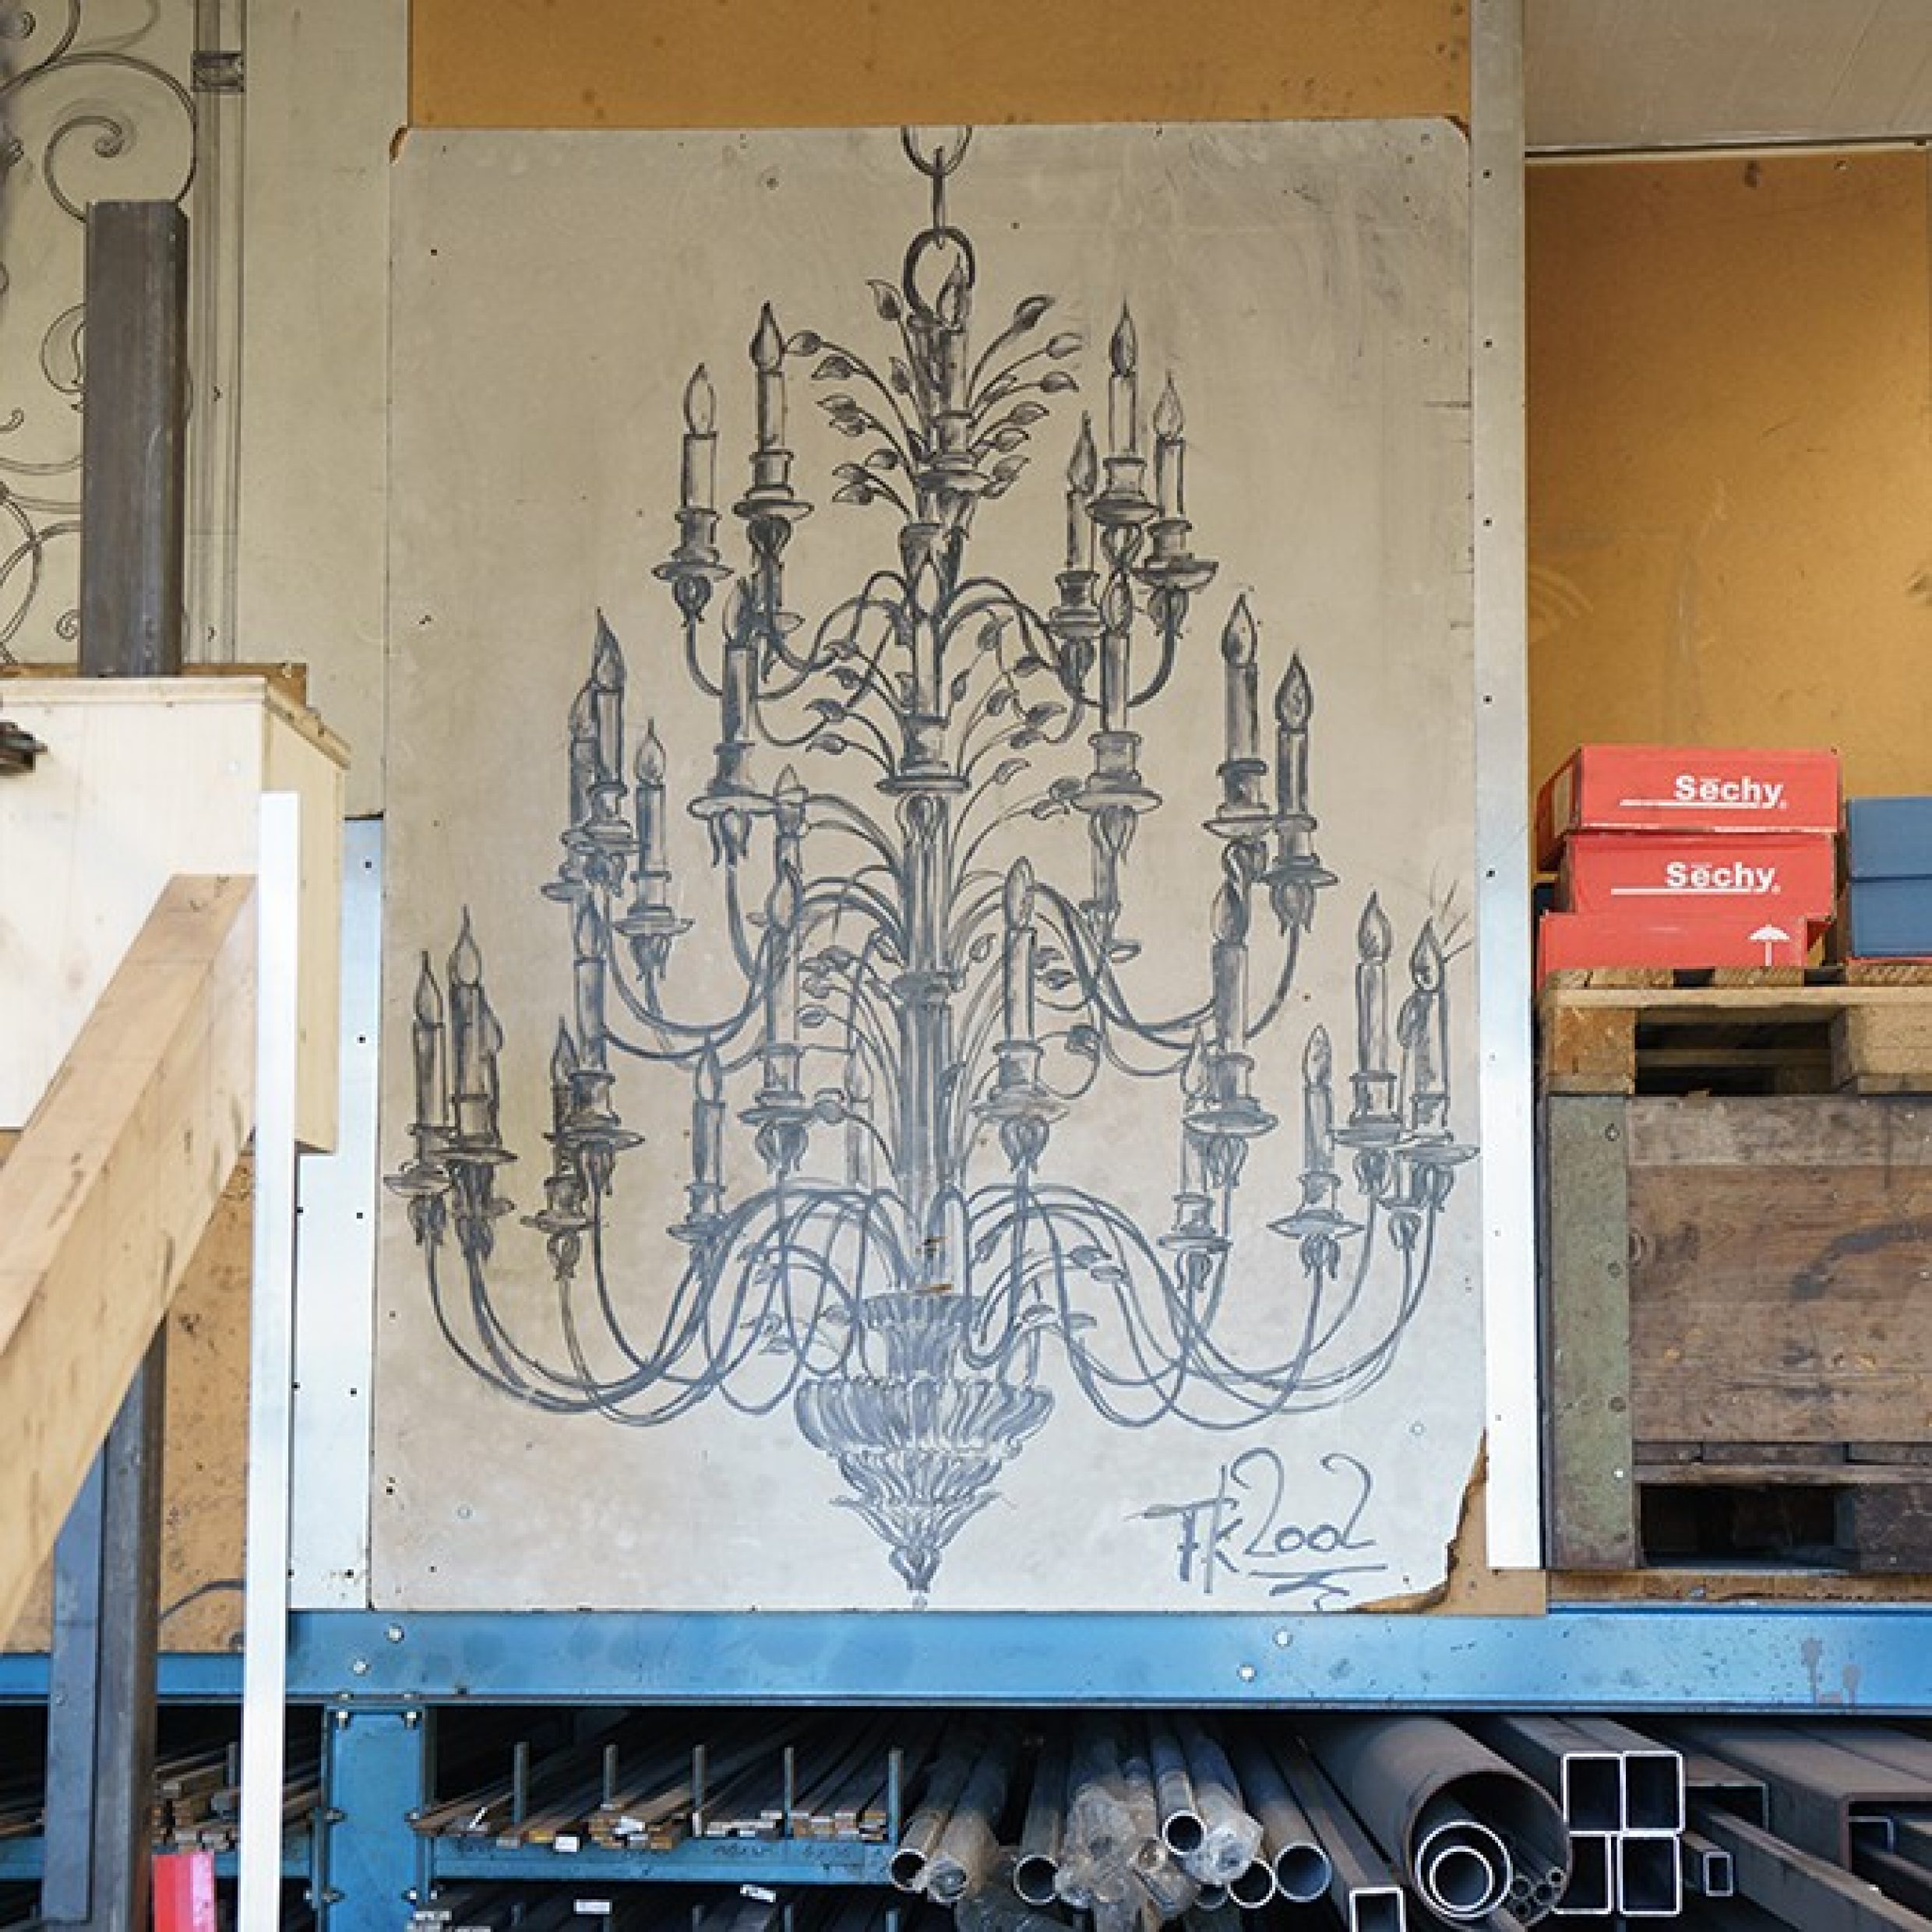 Sketch of a chandelier on the wall.